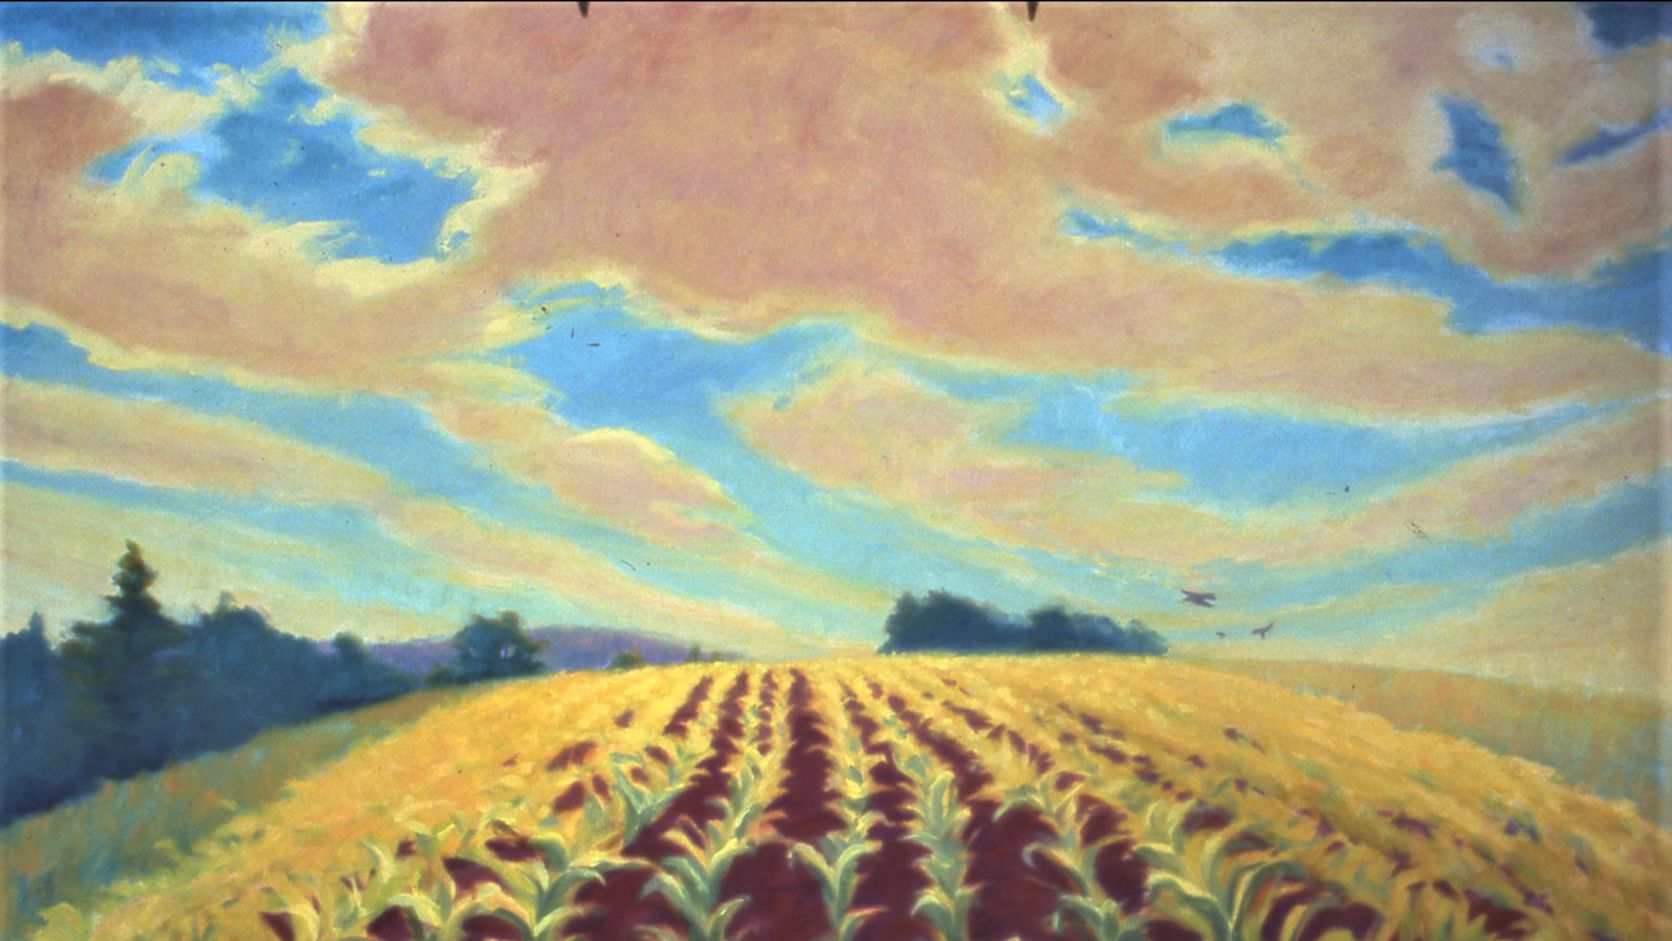 A painting of a field planted with rows of corn, receding into the background, with long stripes of clouds in a blue sky overhead.